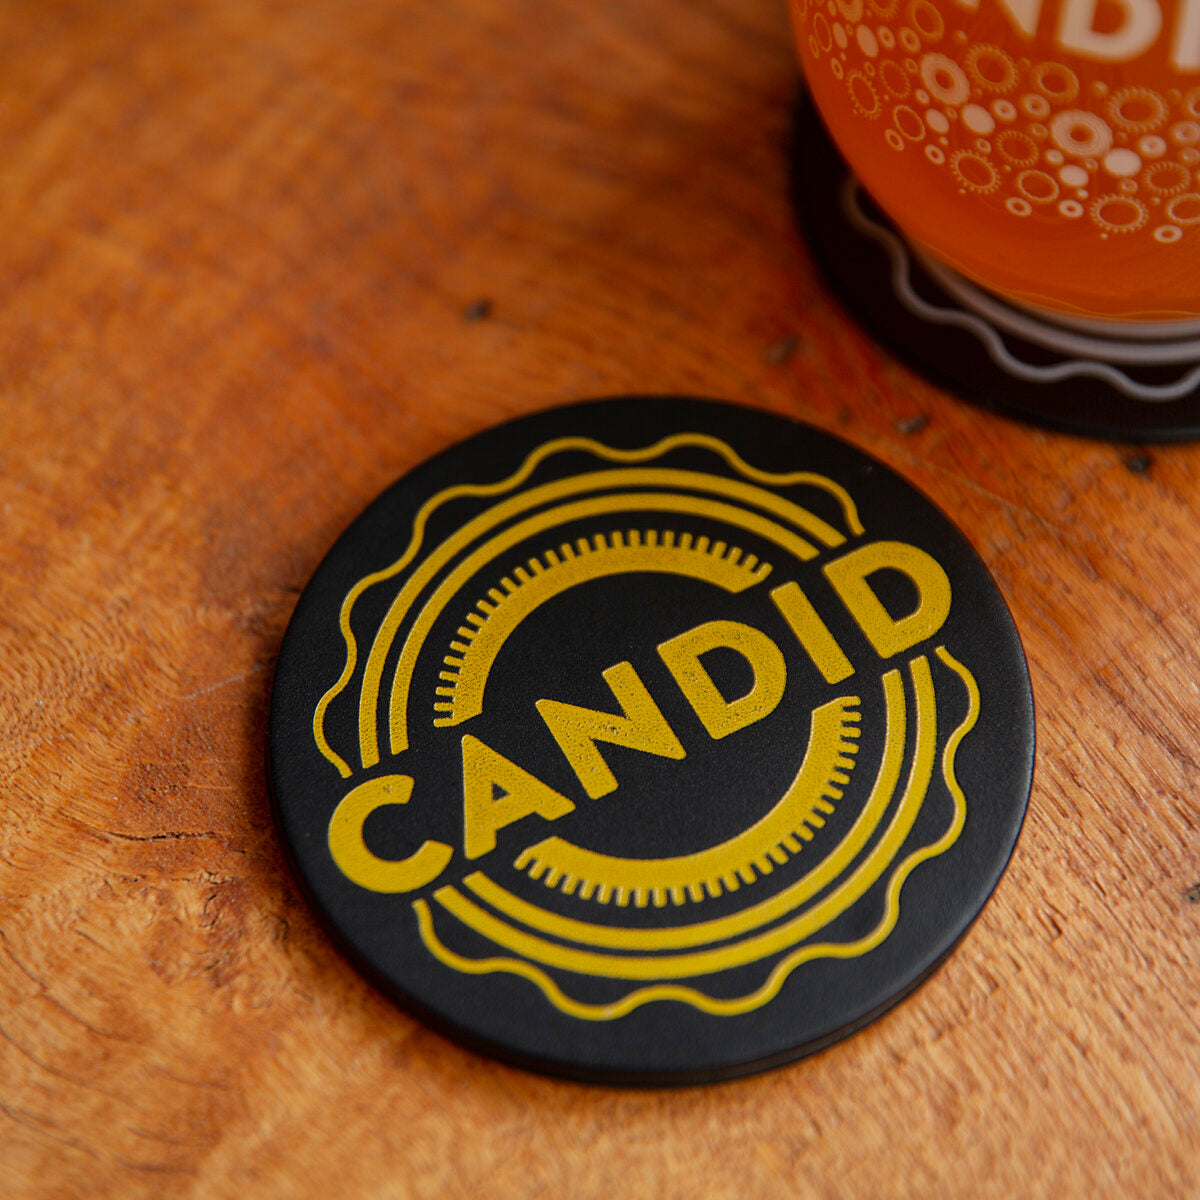 Candid Leather Coasters